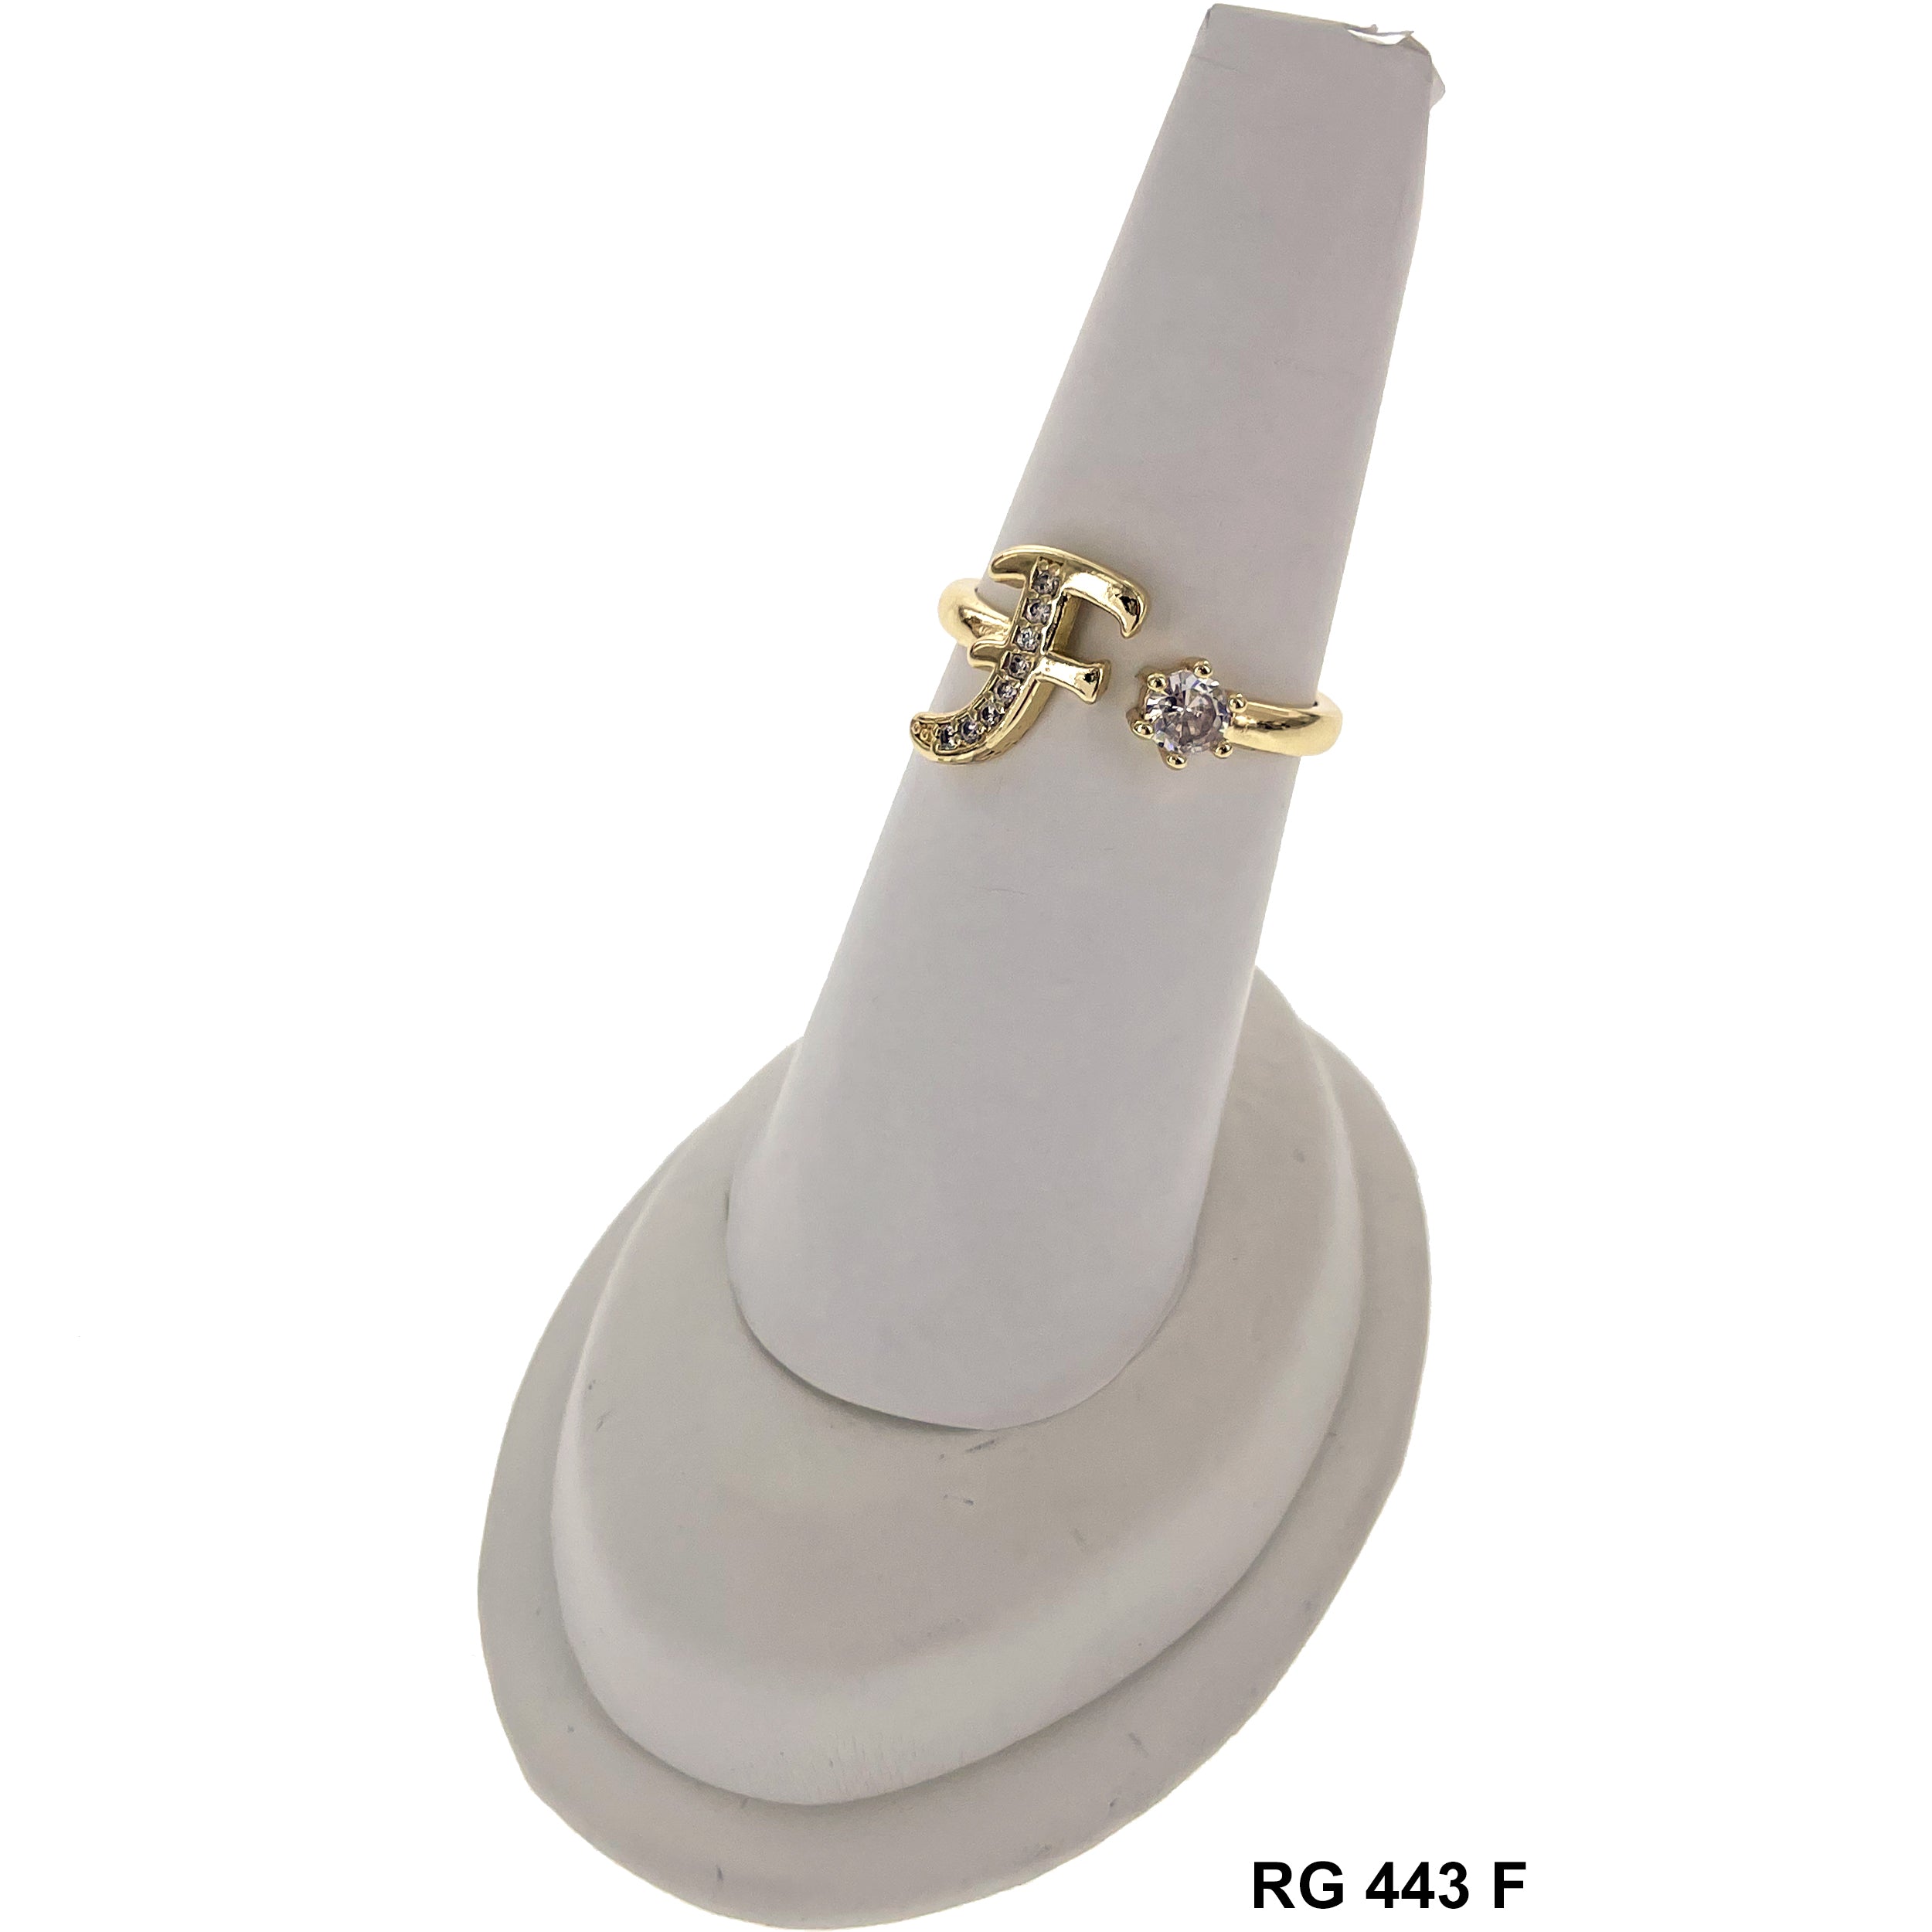 Initial Adjustable Ring RG 443 F